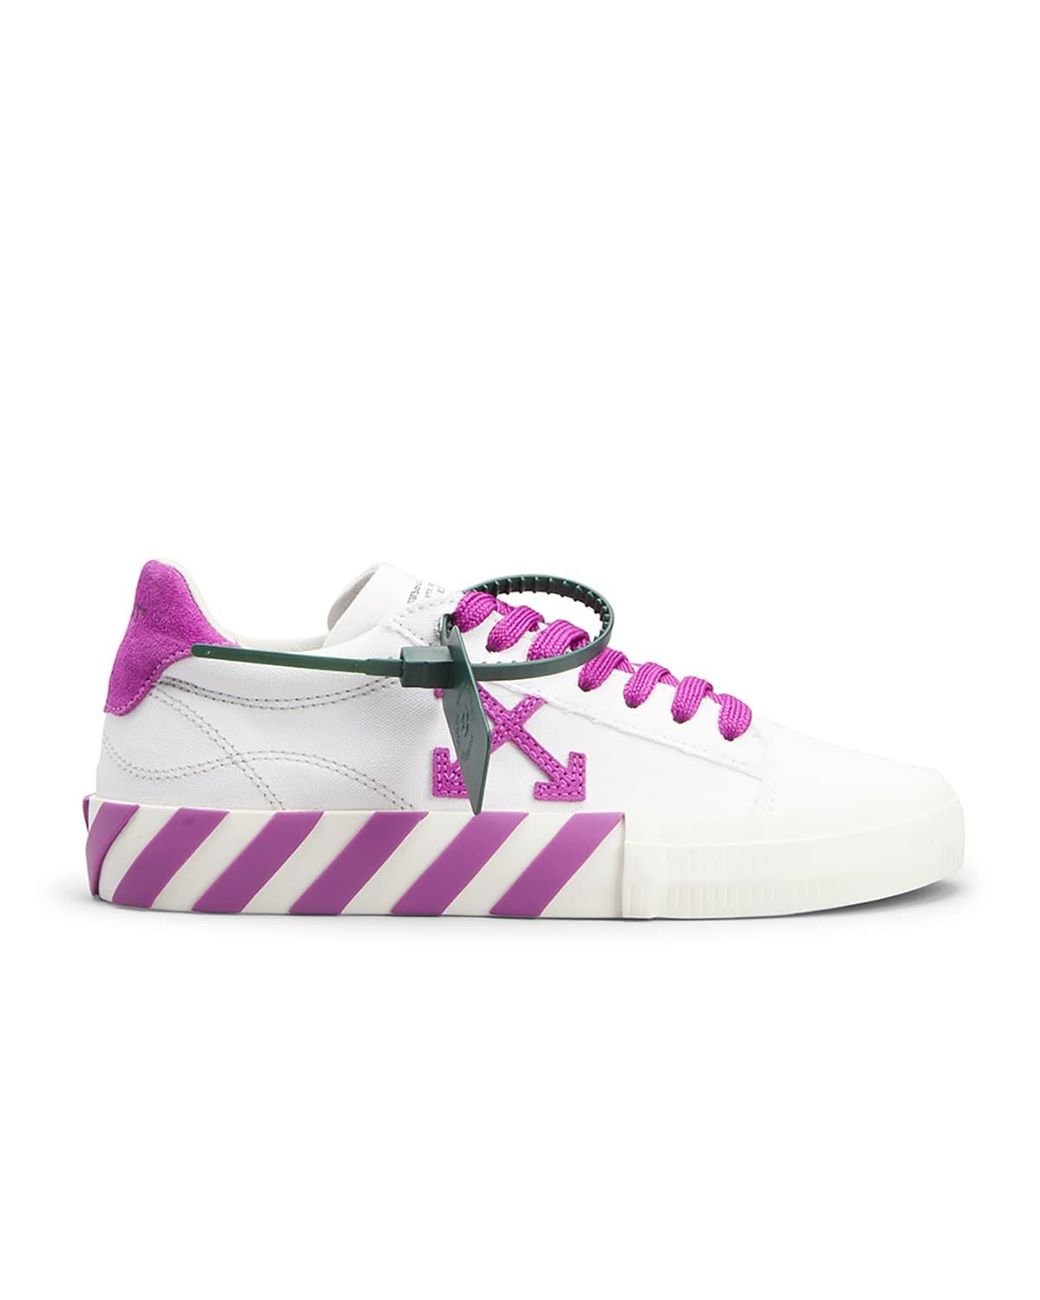 Off-White c/o Virgil Abloh Low Vulcanized Sneakers in Pink